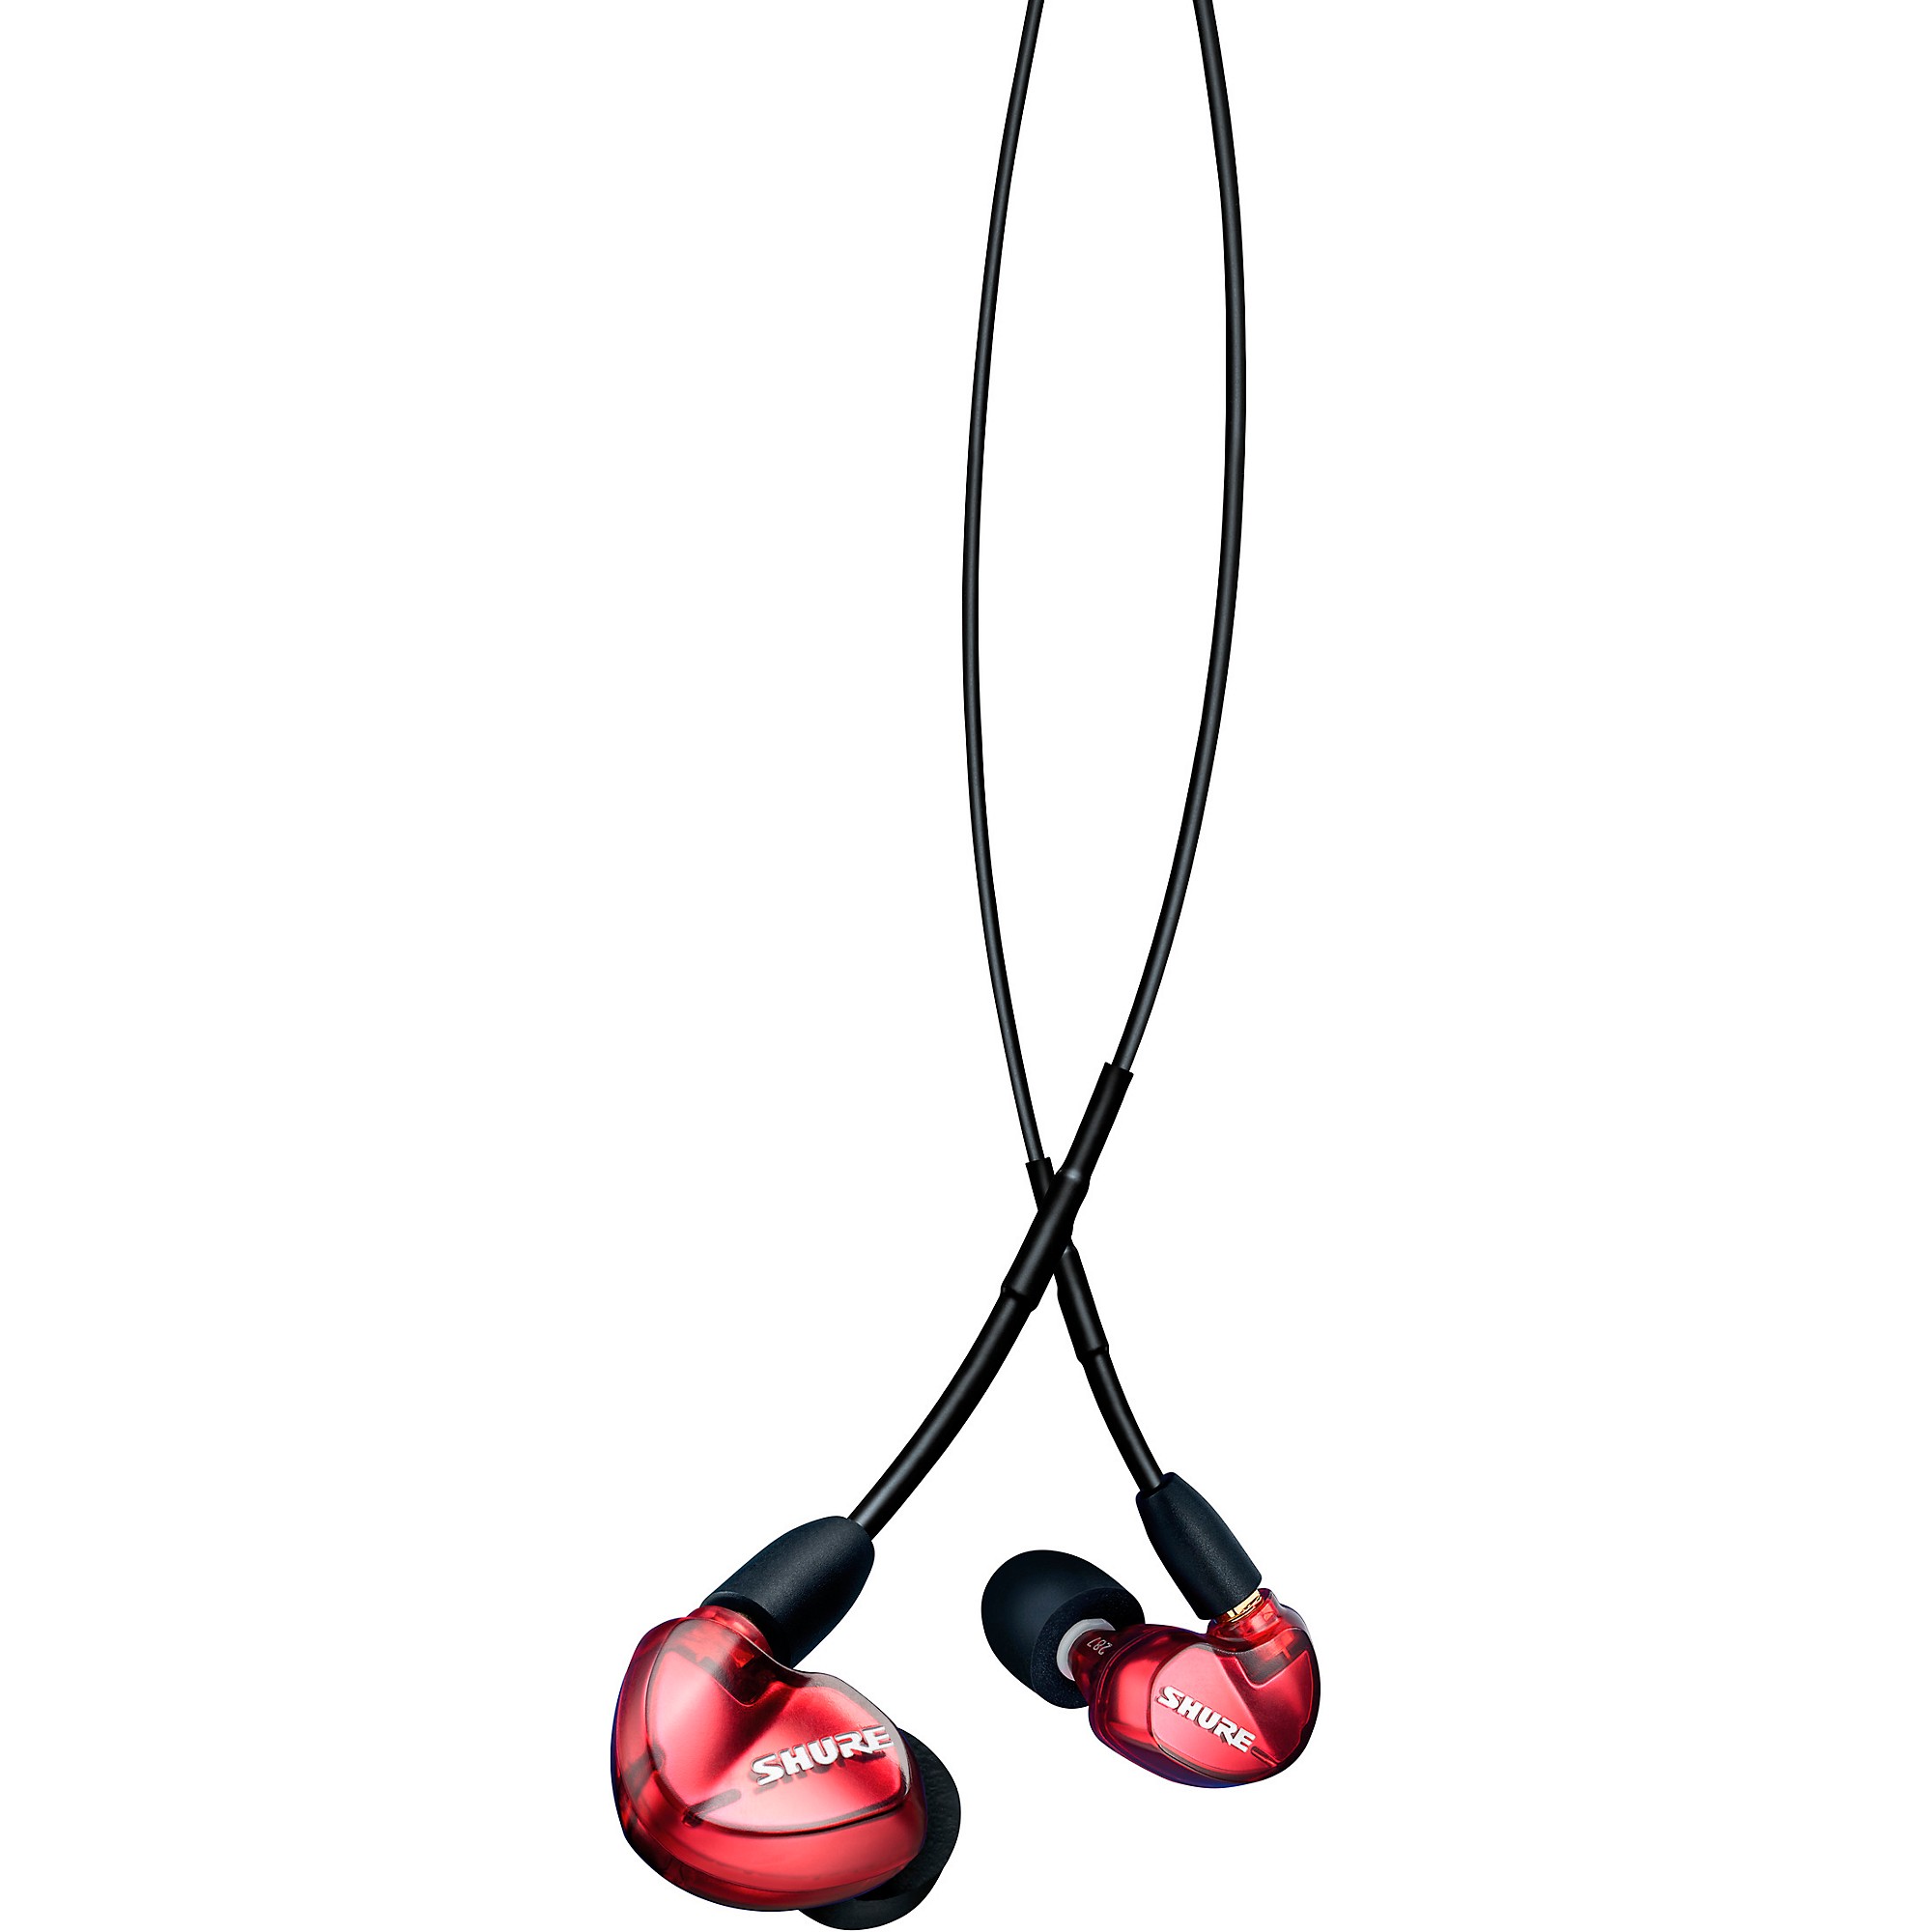 Shure SE535 Special Edition Sound Isolating Earphones Includes